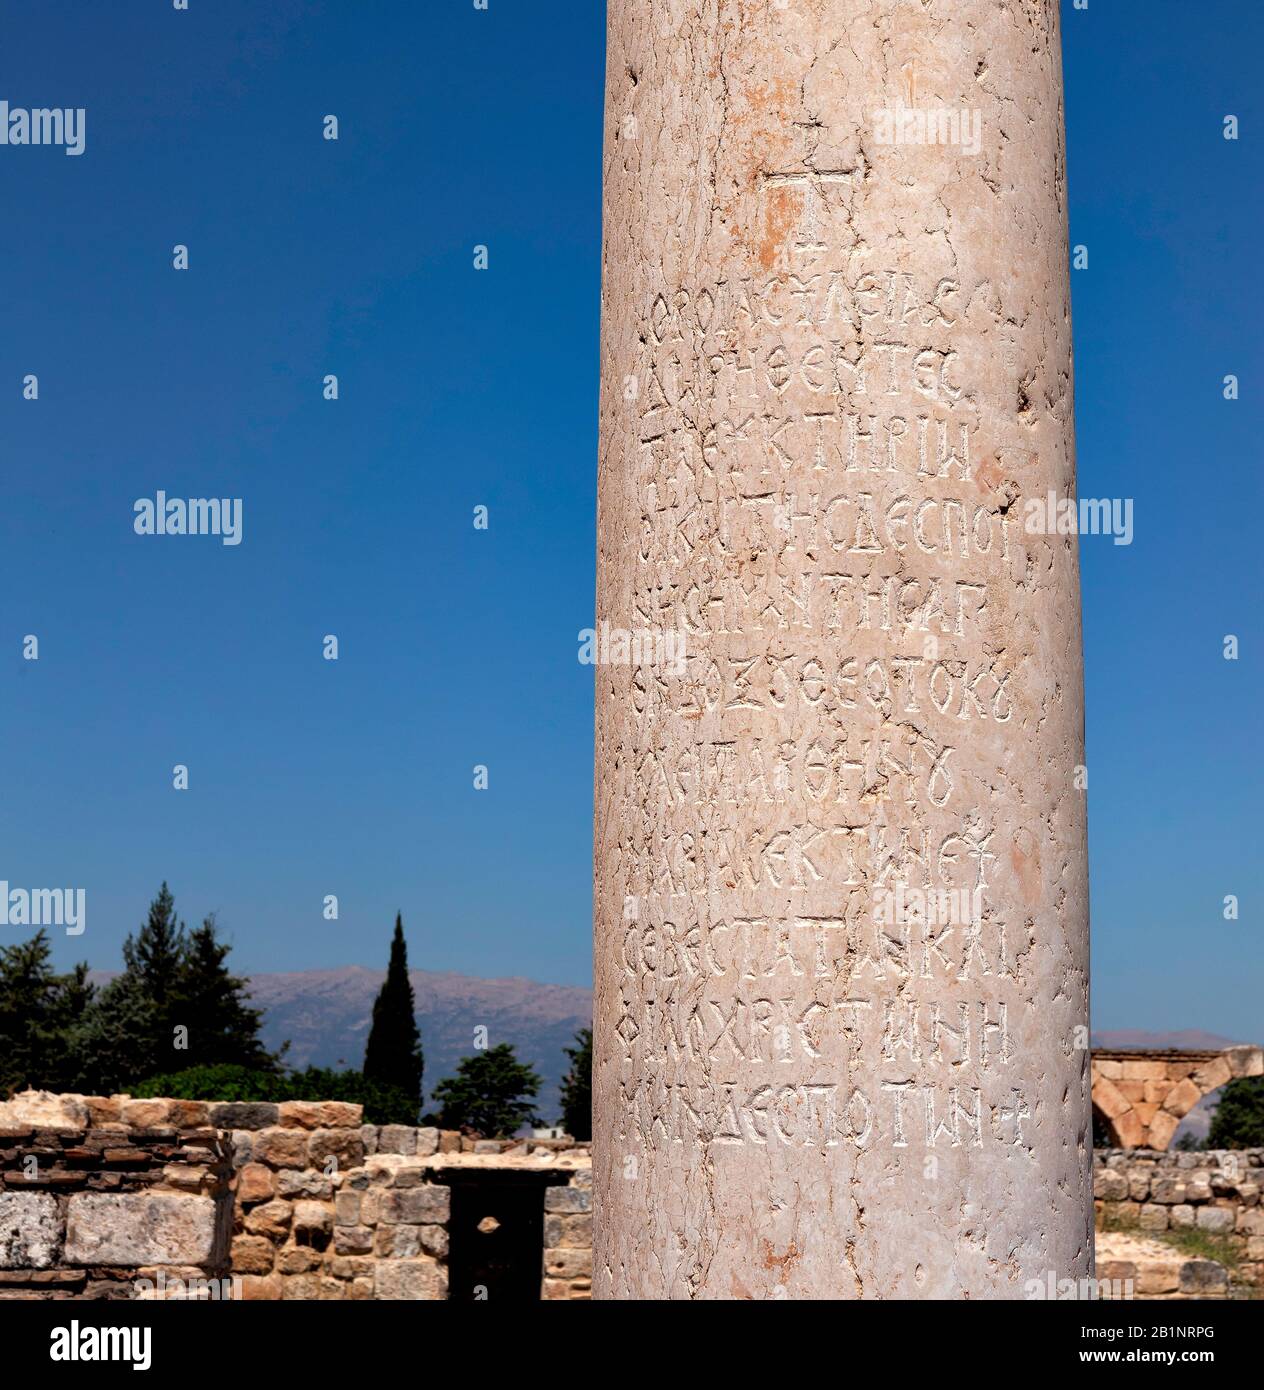 Marble column with Greek inscription from the ancient city Anjar, Lebanon.  Capital of Umayyad dynasty, first Arab empire. UNESCO World Heritage Site. Stock Photo